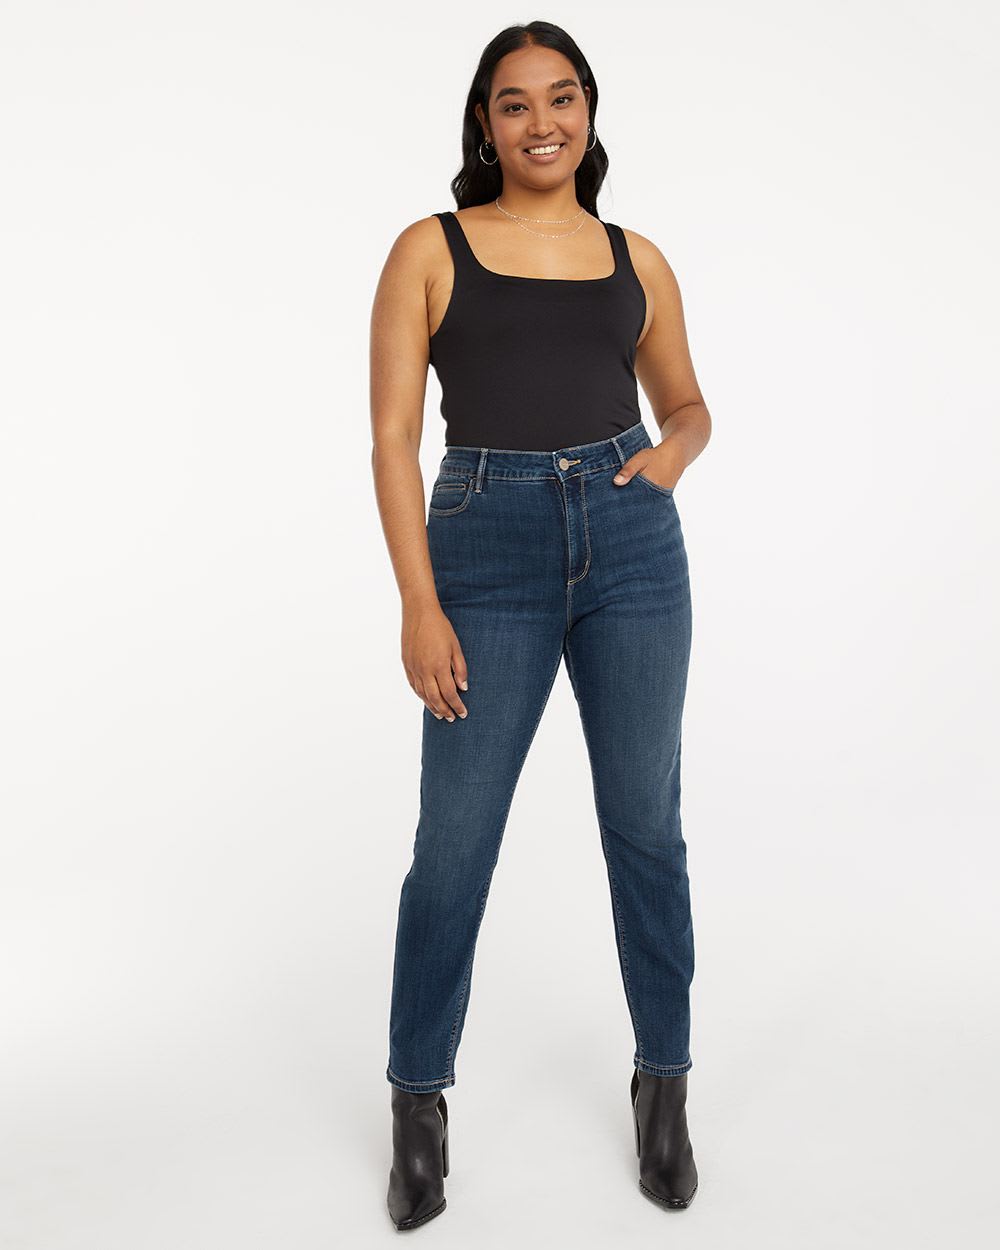 Difference in length and inseam for One Size vs. Tall and Curvy